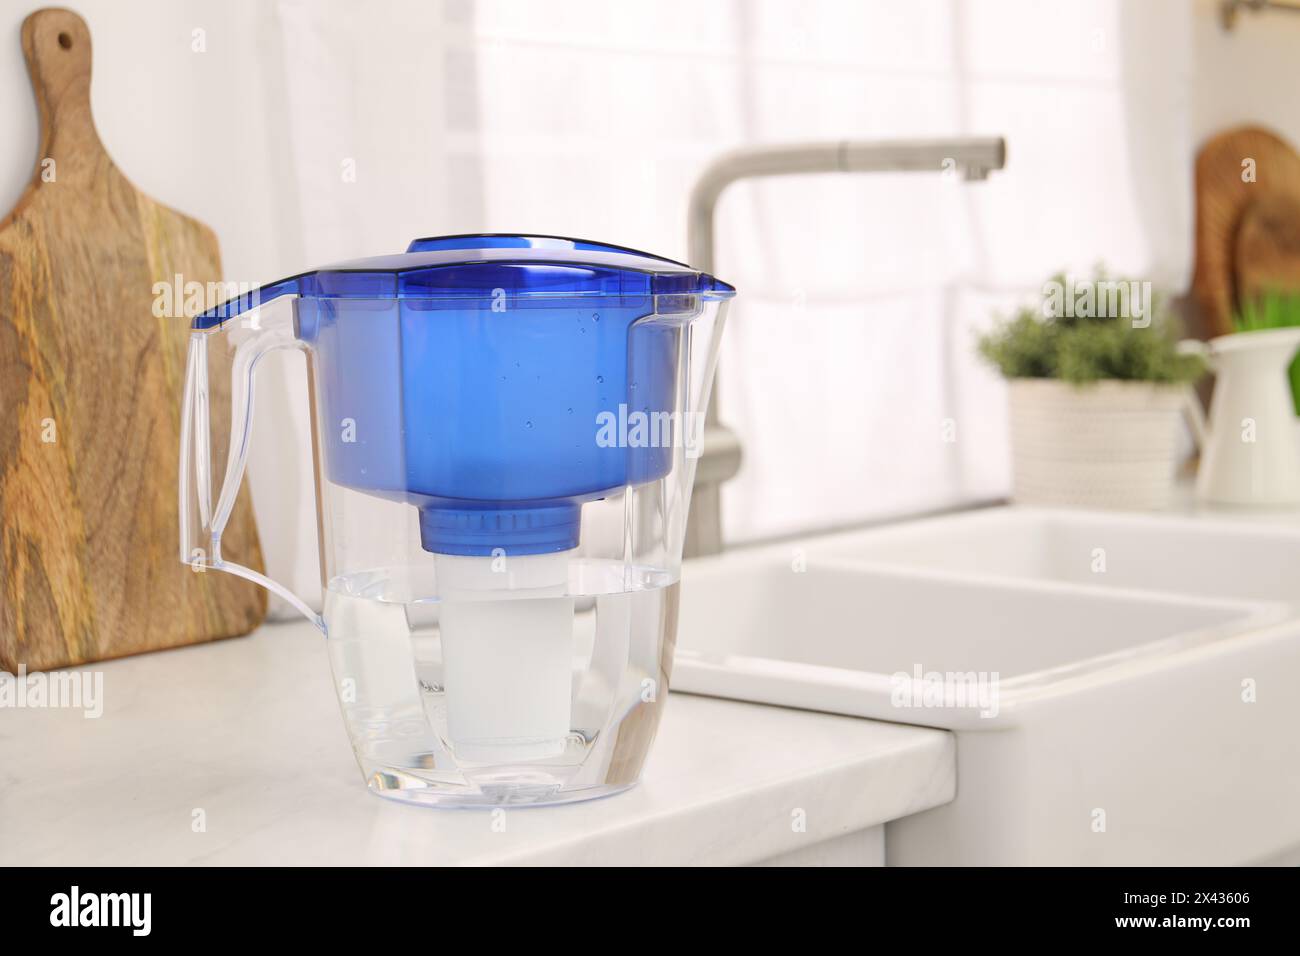 Water filter jug on white countertop in kitchen, space for text Stock Photo